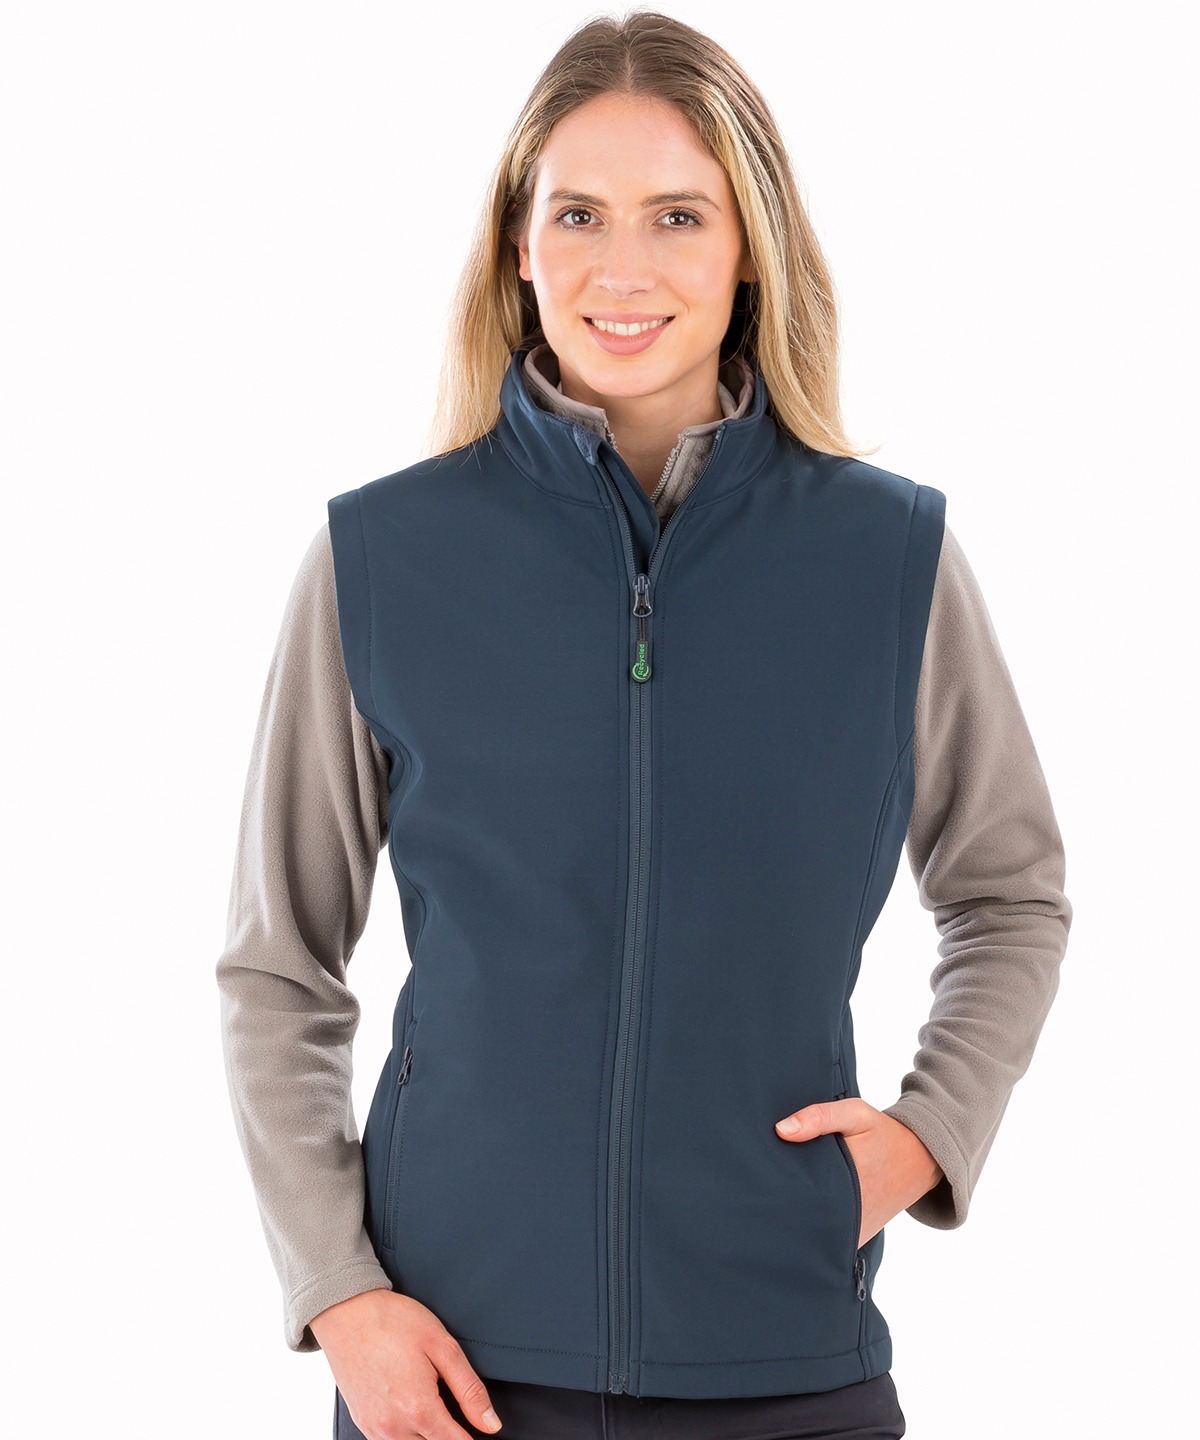 Women’s Recycled 2-Layer Printable Softshell Bodywarmer